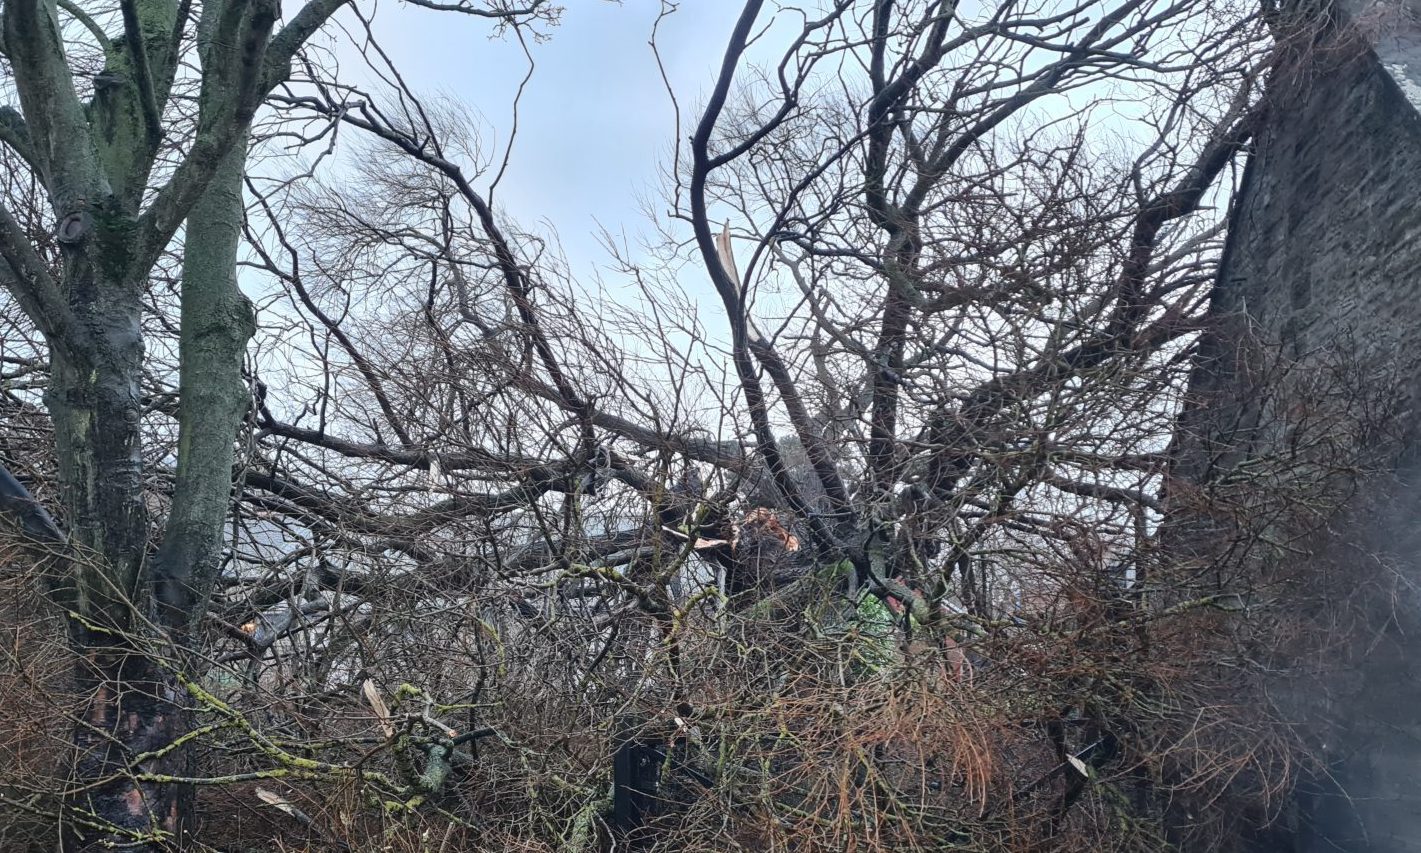 The Dibble Tree, which has been a fixture in Carnoustie for over 225 years, fell during Storm Gerrit. Image: Alec Edward